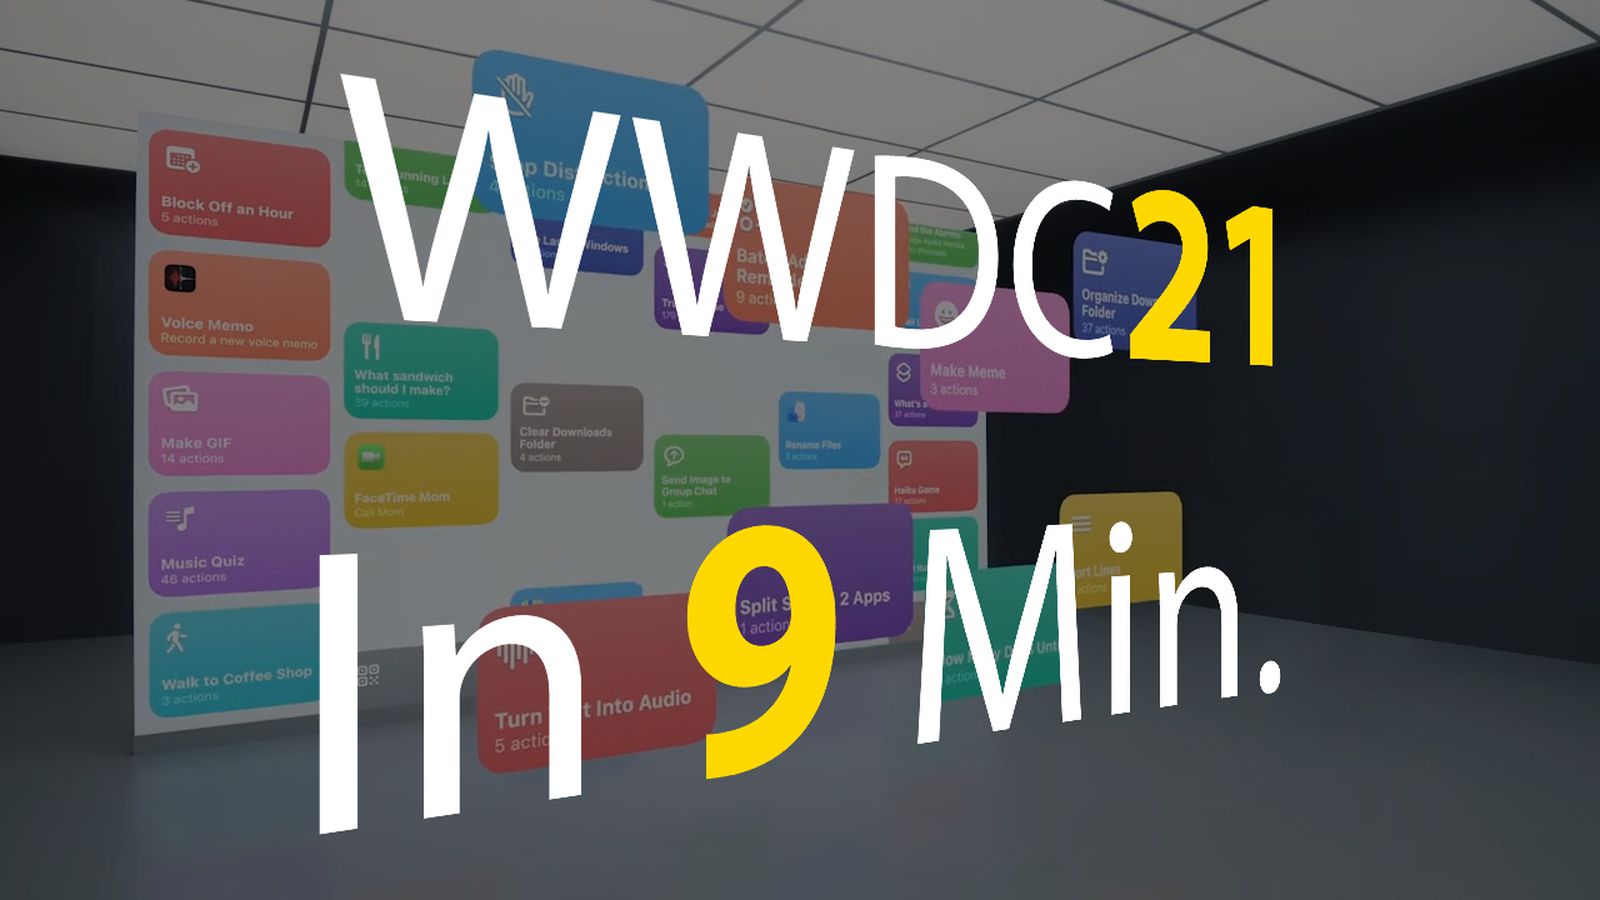 Wwdc21 in 9 minutes feature